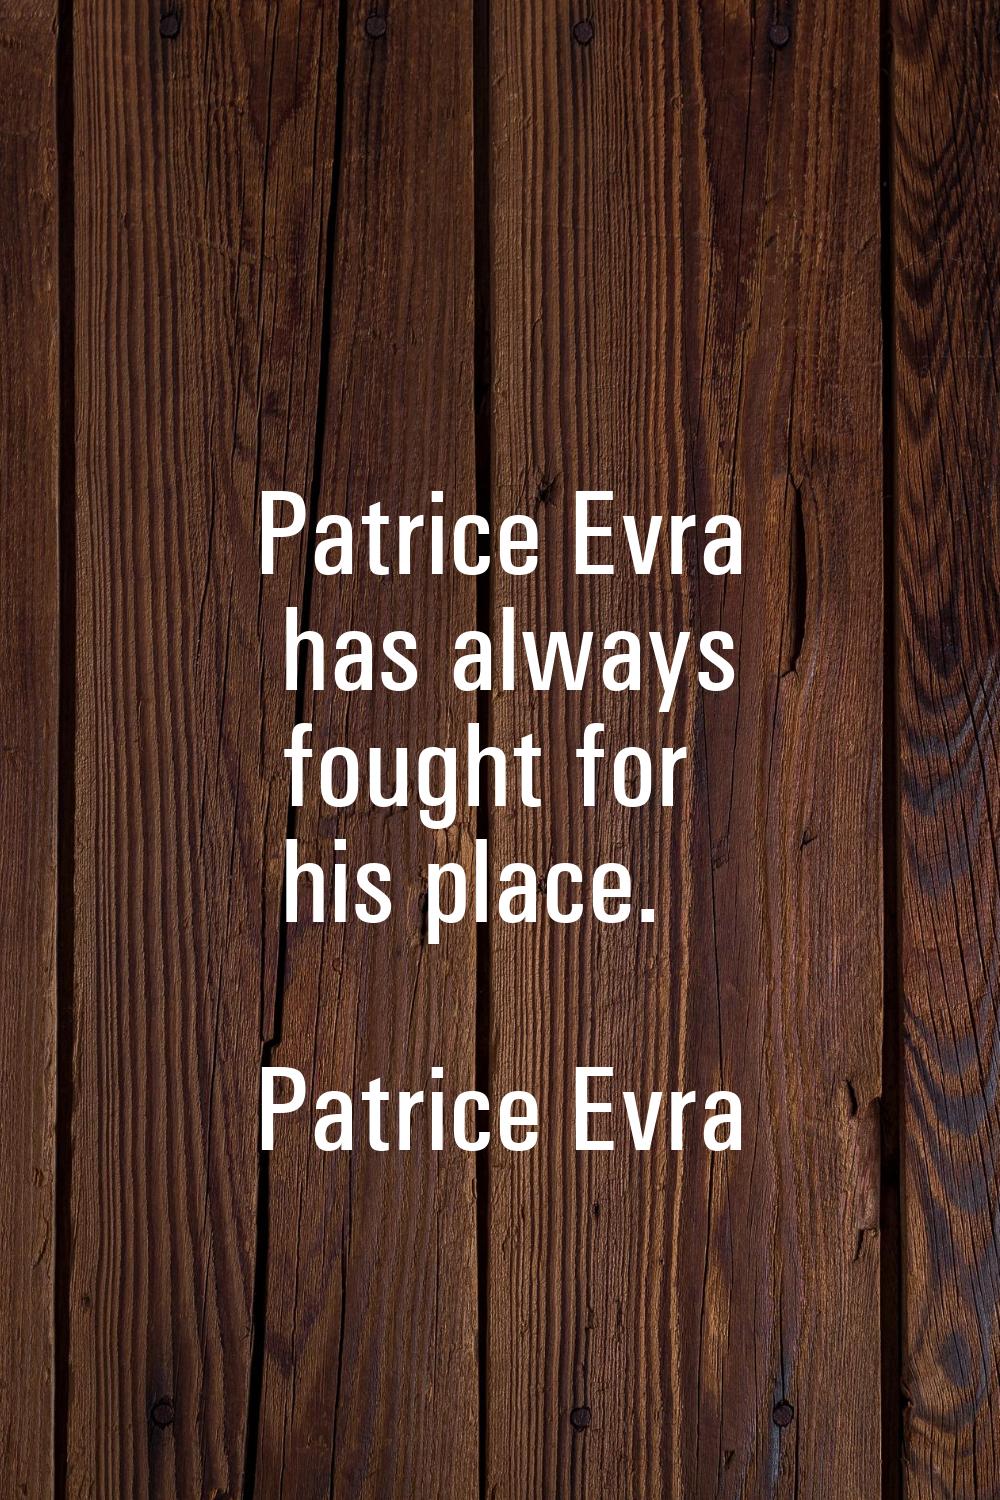 Patrice Evra has always fought for his place.